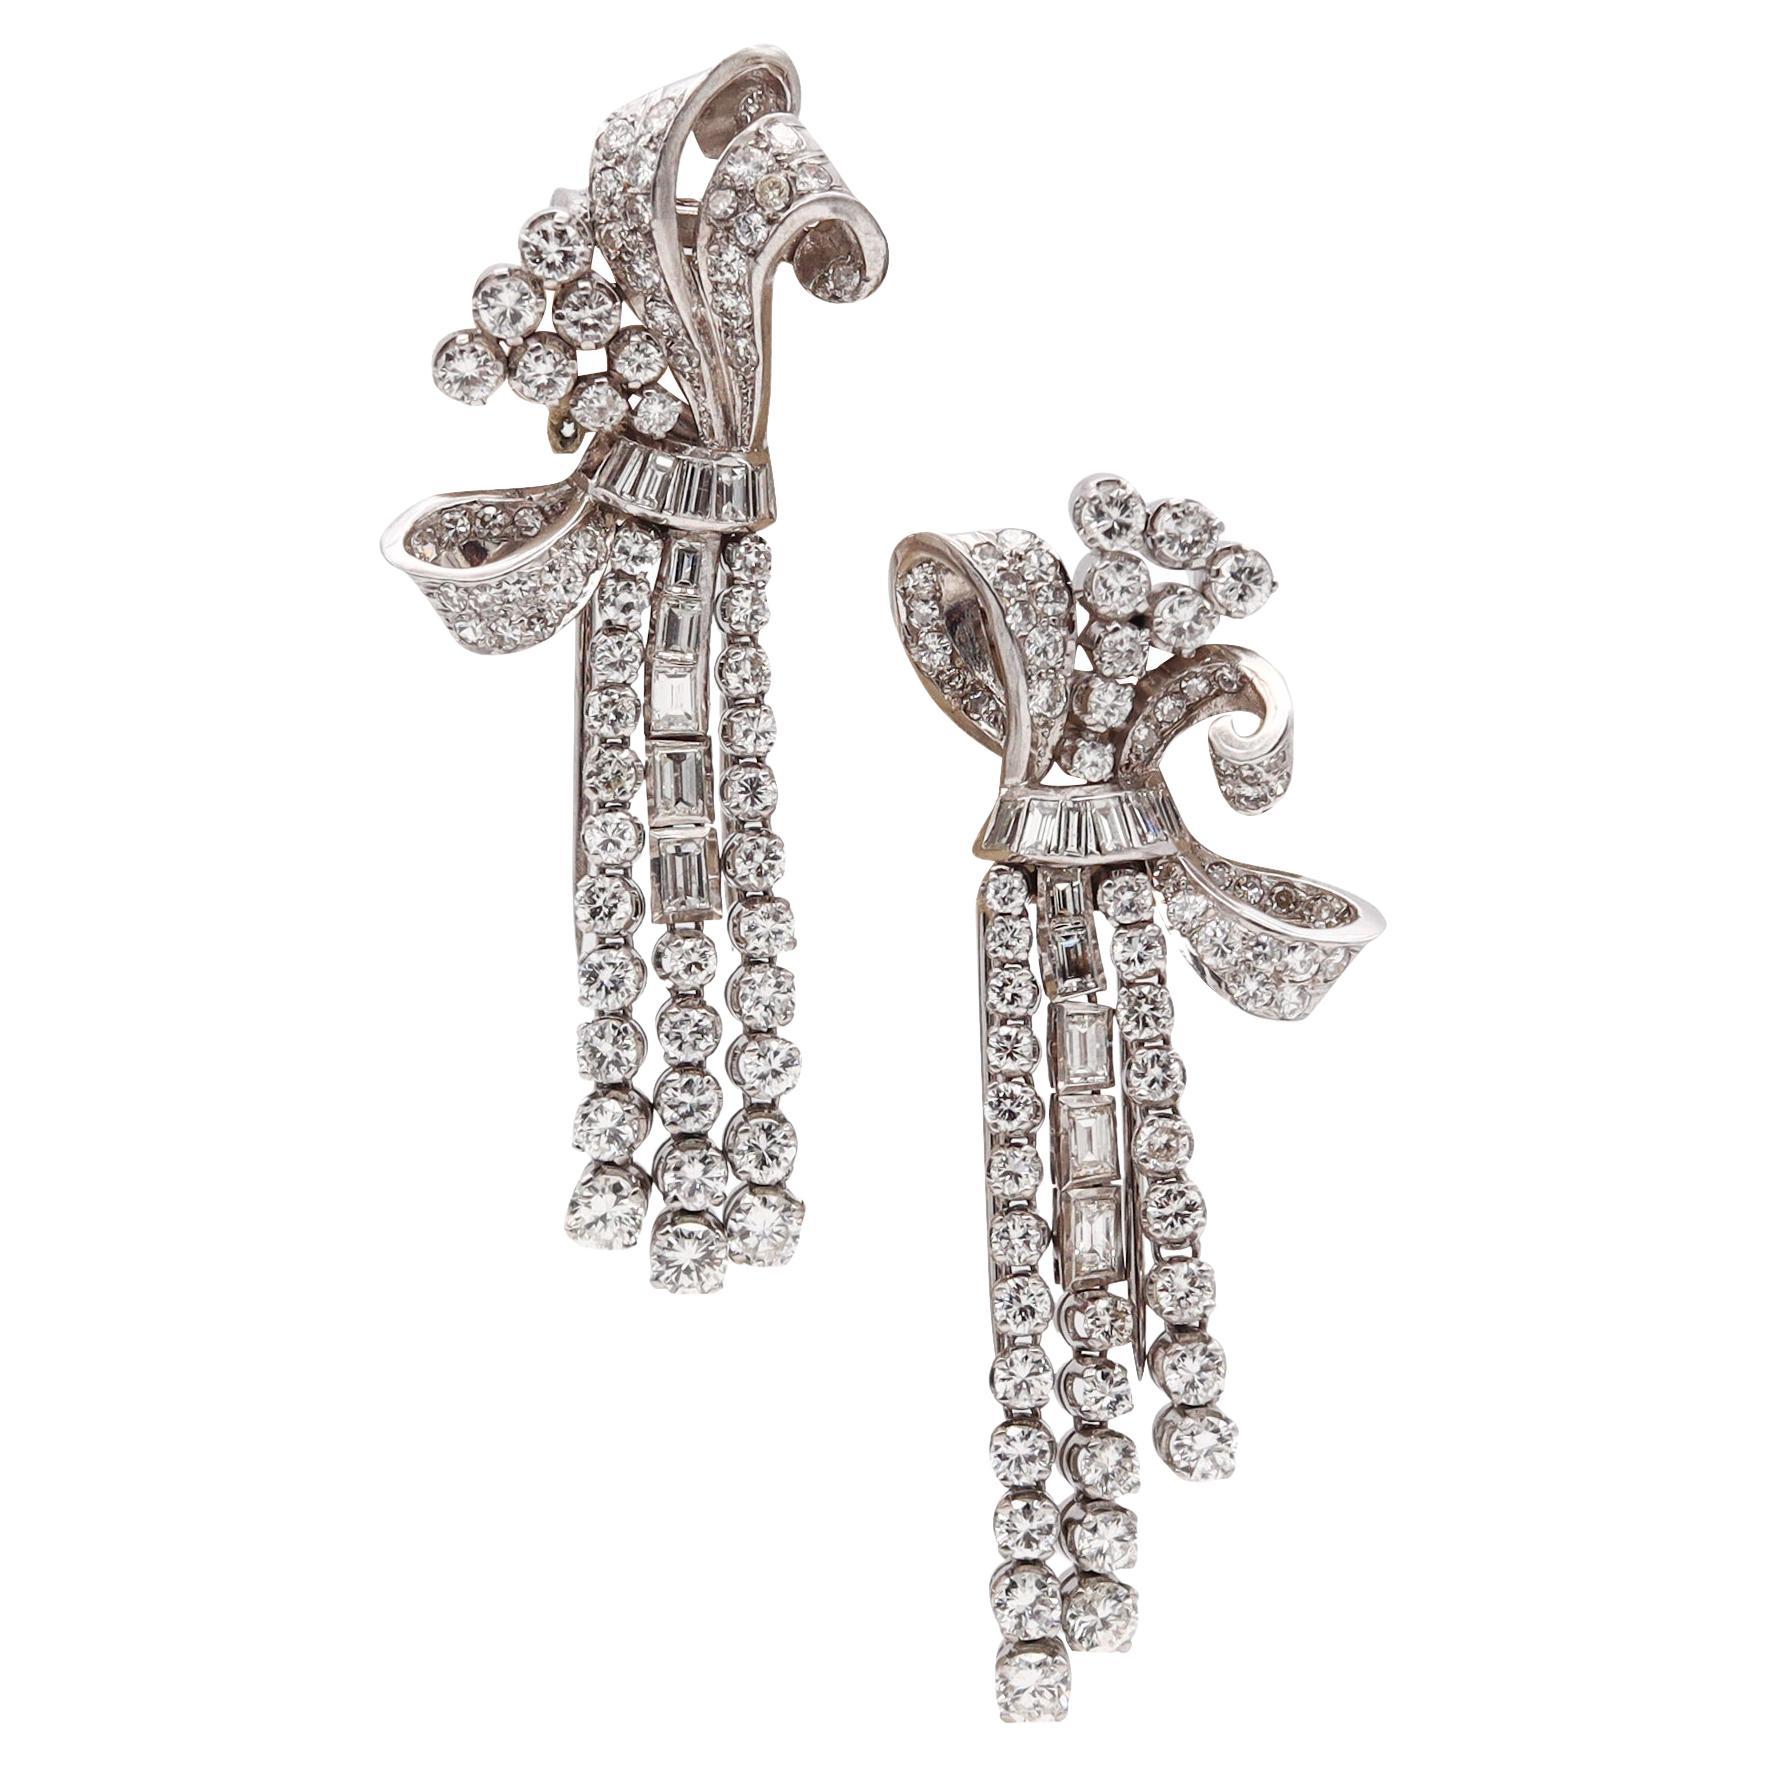 Art Deco 1930 Pair Of Clips Brooches In Platinum With 23.72 Cts Of VS Diamonds